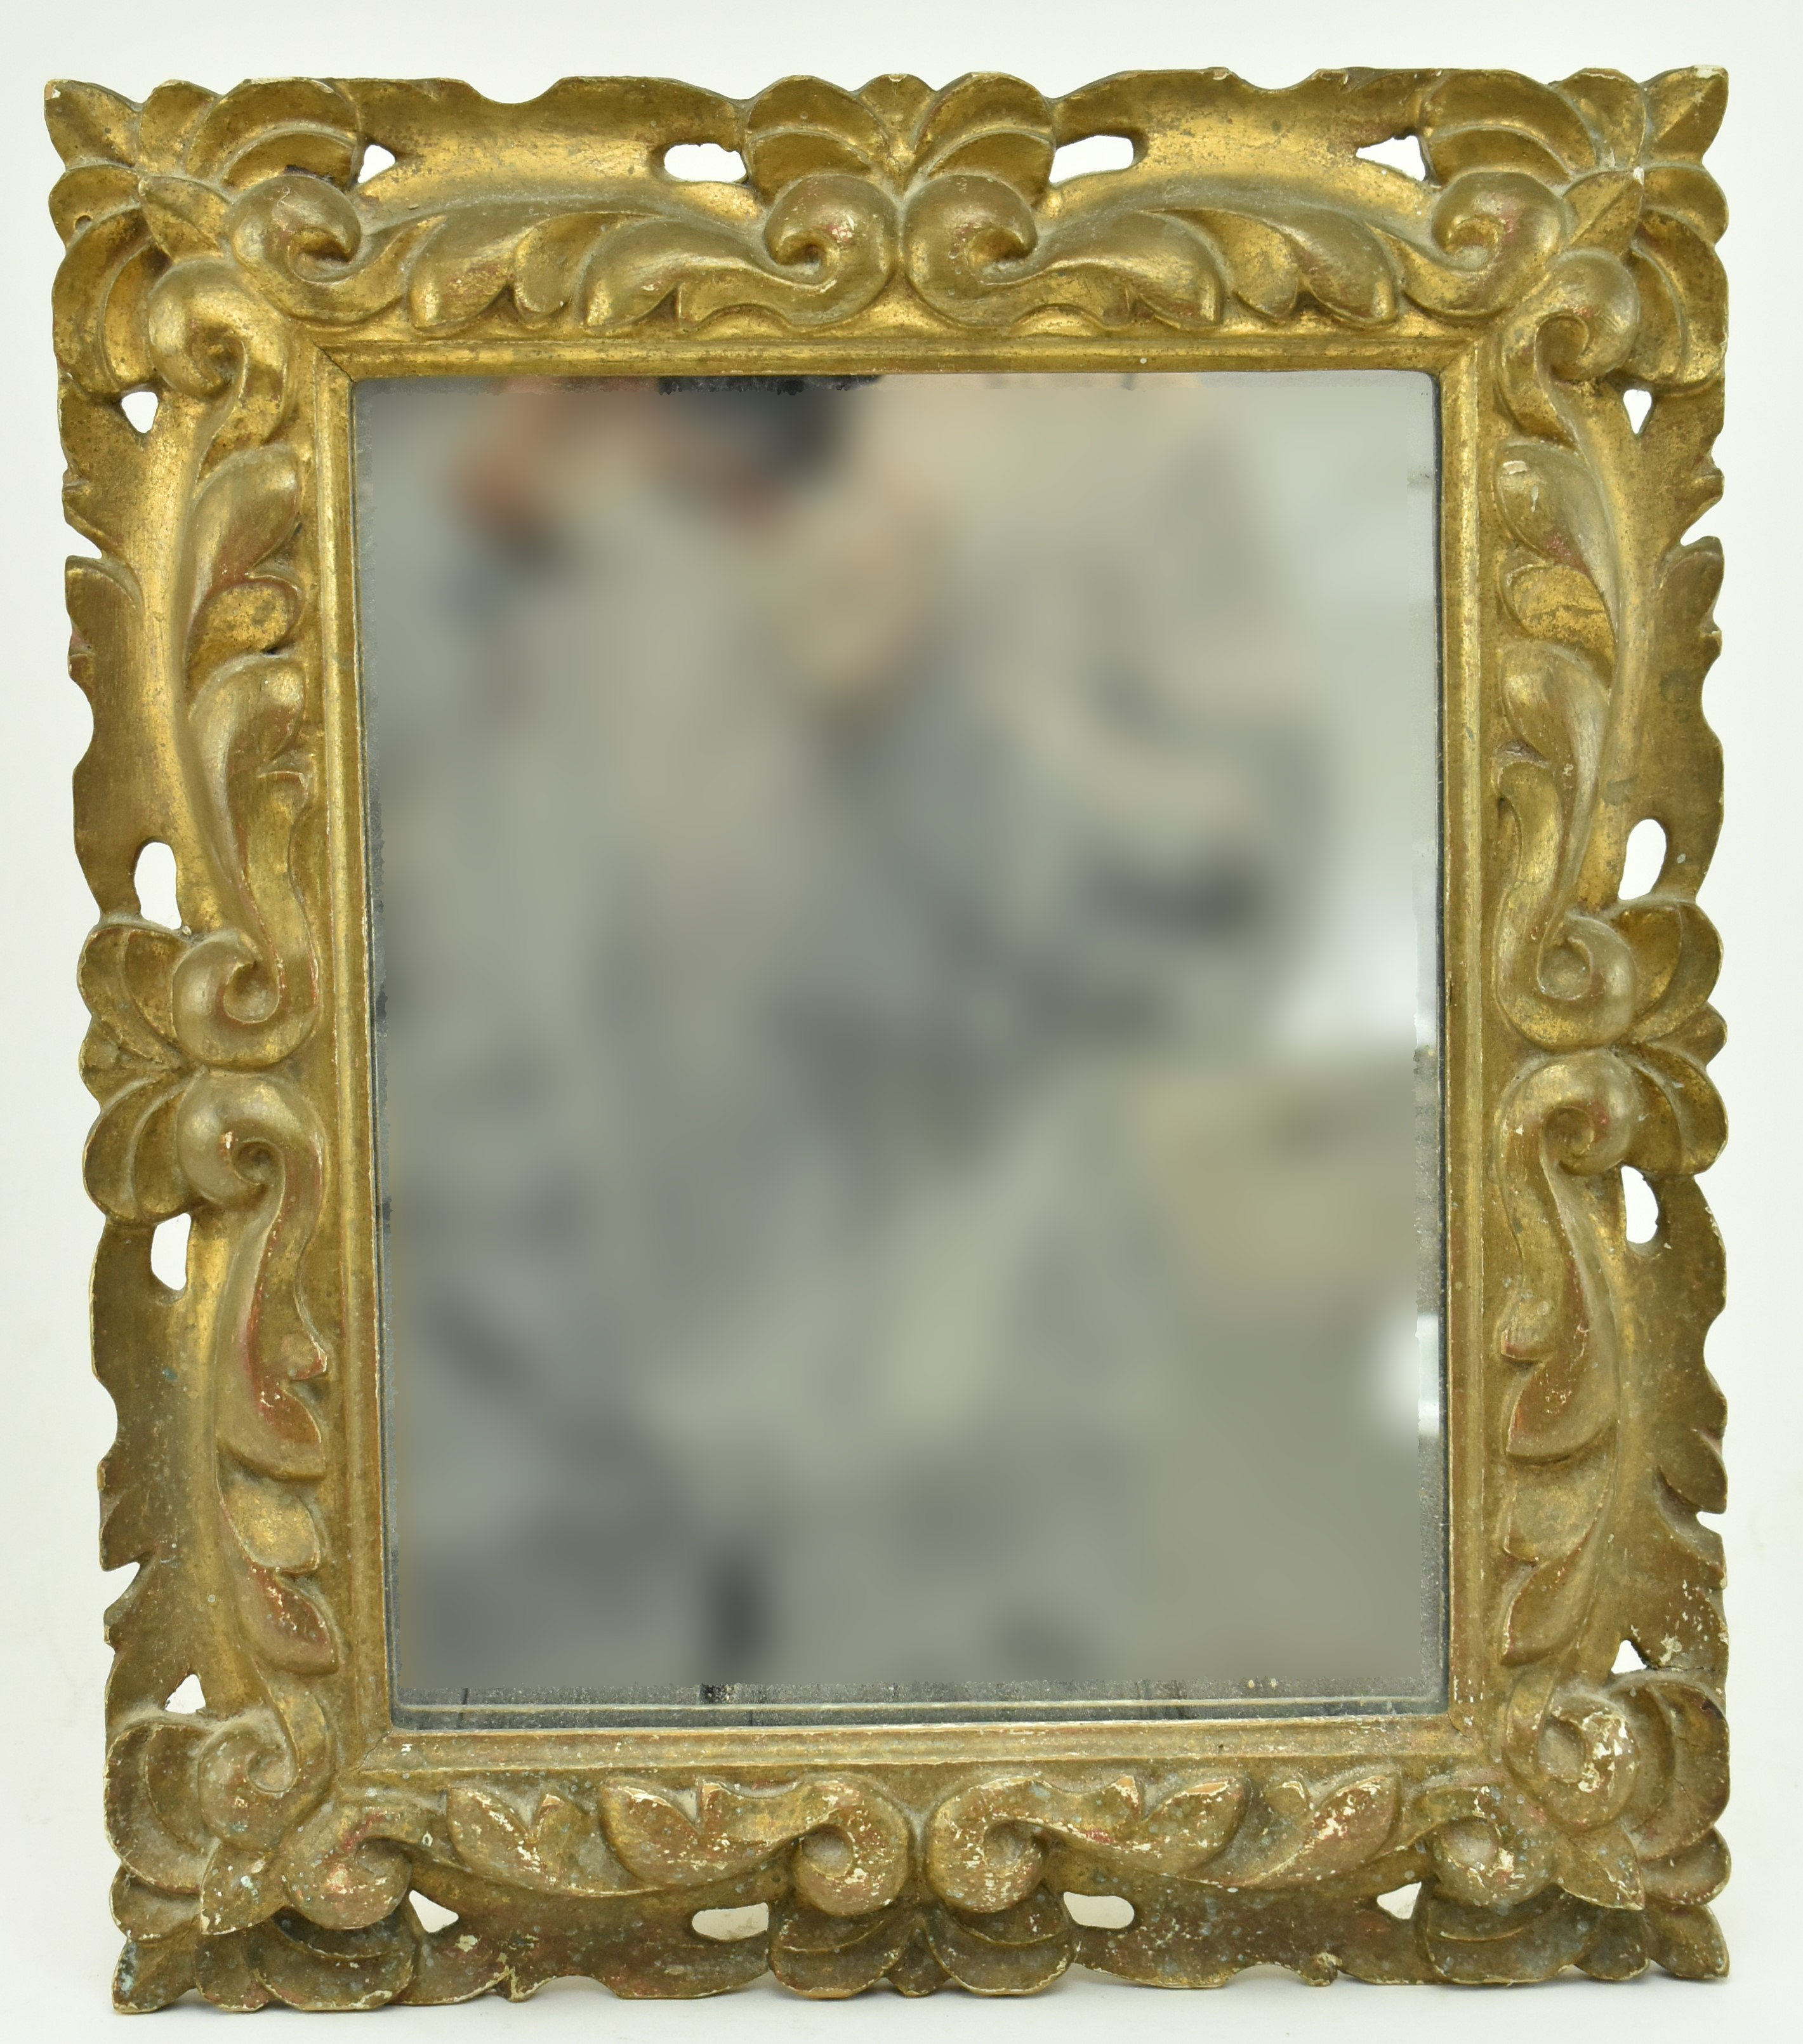 CONTINENTAL EARLY 20TH CENTURY GILT WOOD DRESSING MIRROR - Image 2 of 4